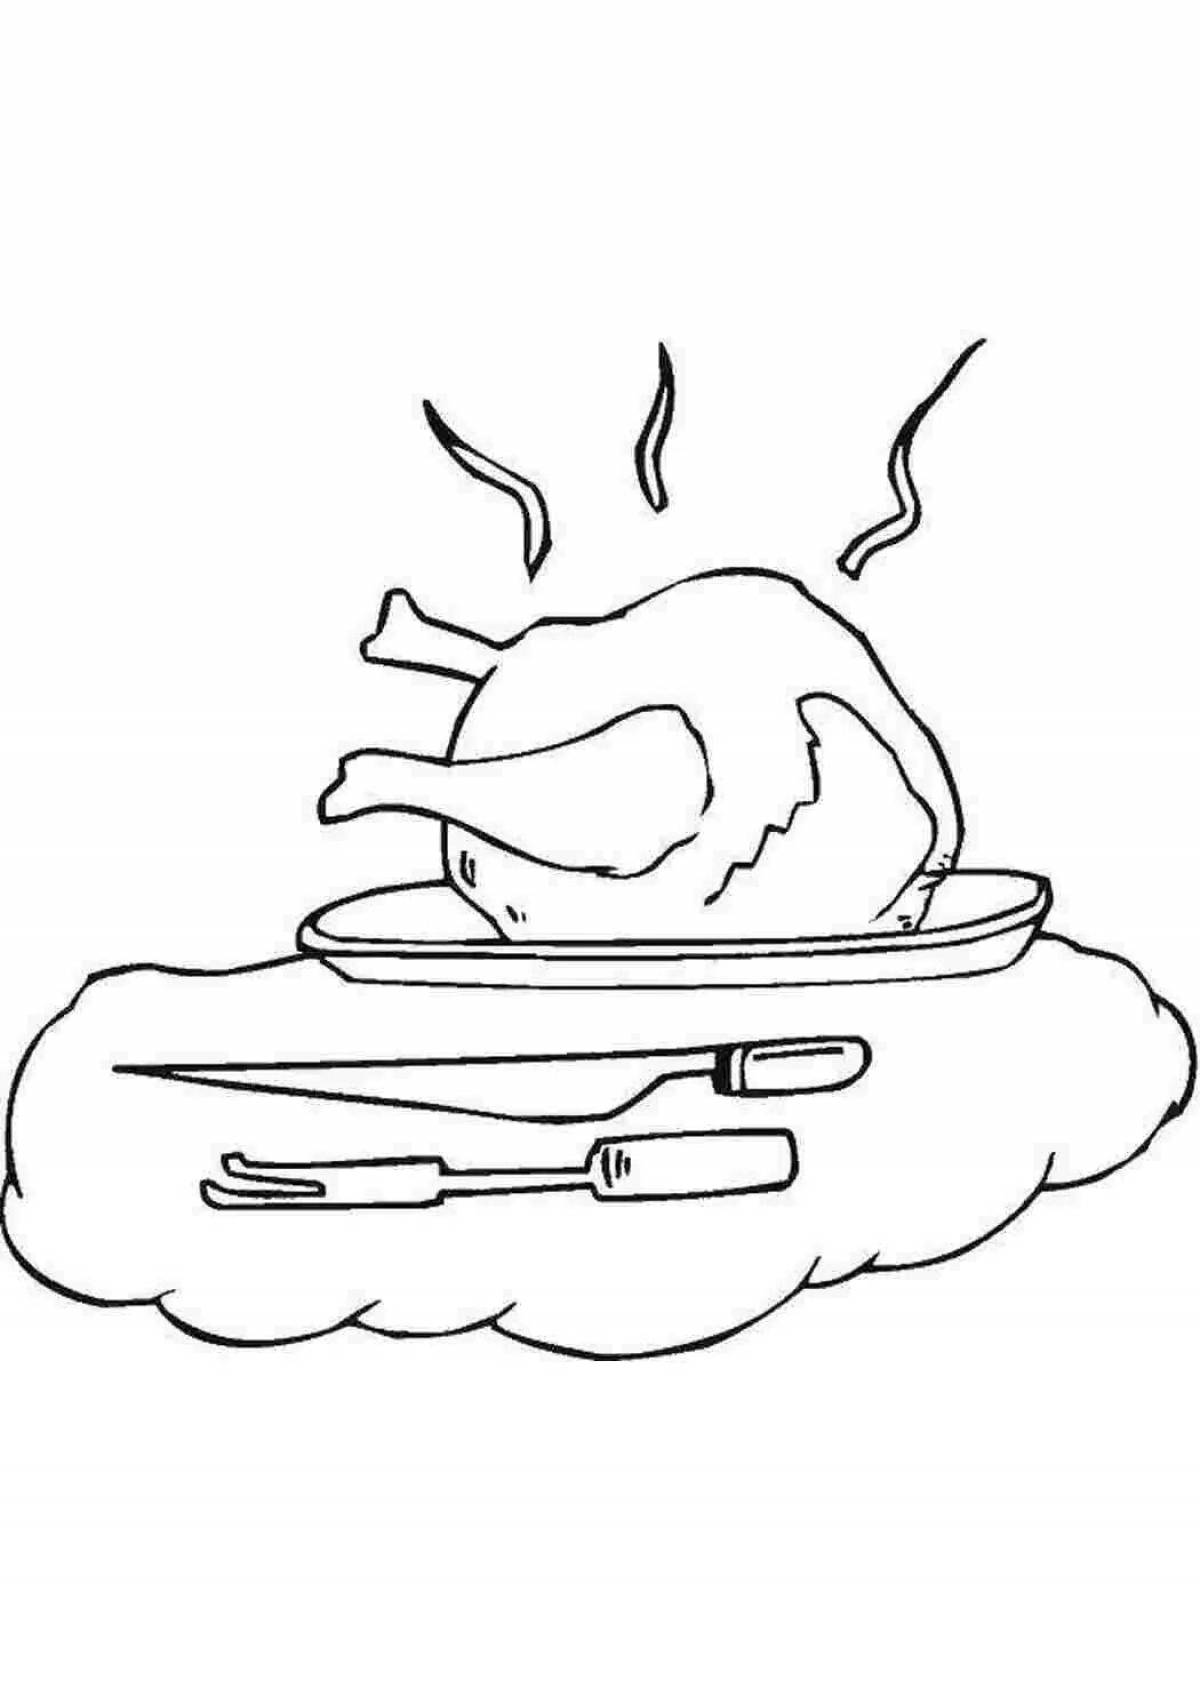 Great omelet coloring page